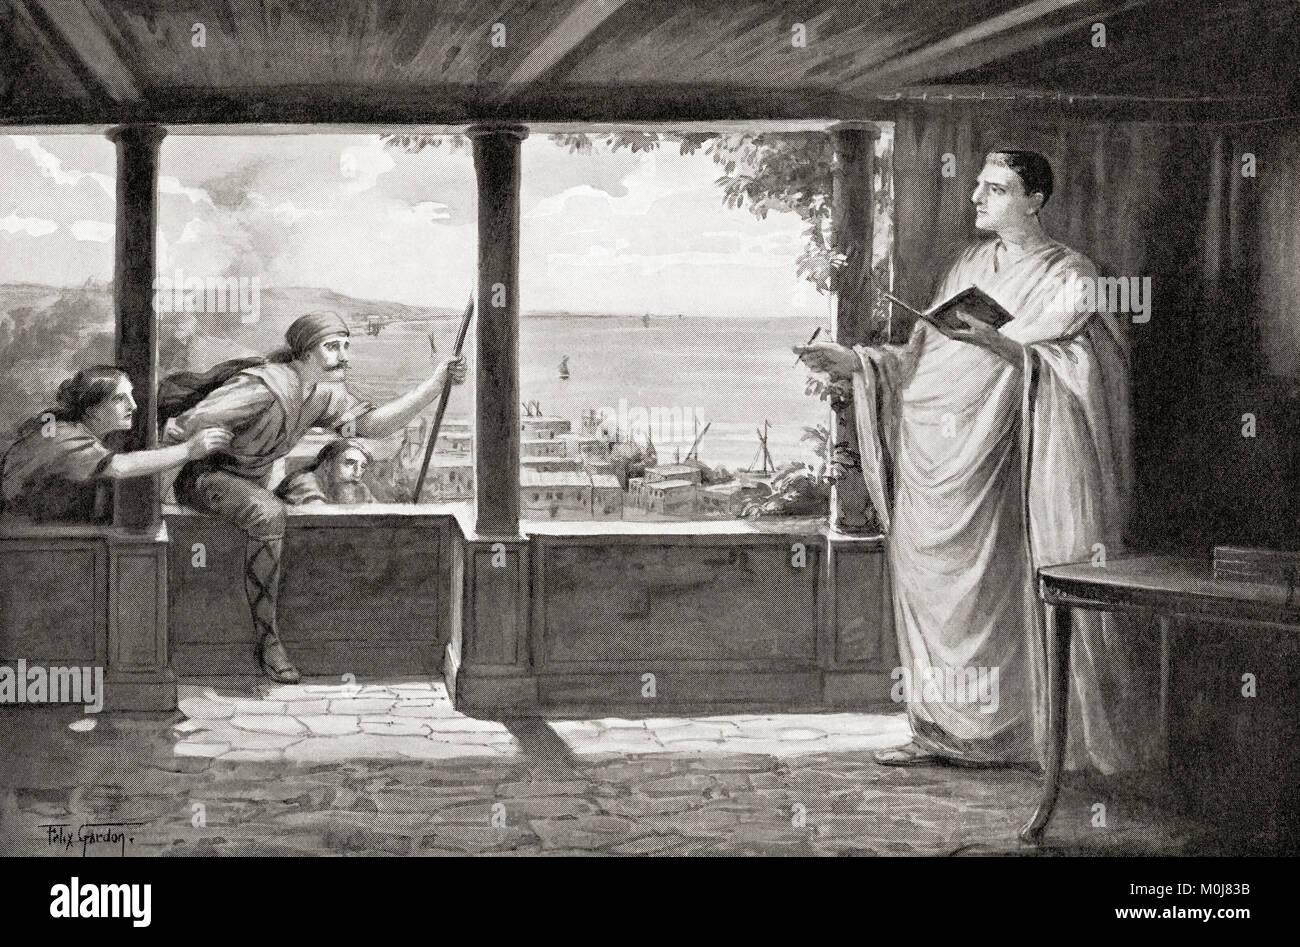 Ovid at Tomis, on the Black Sea, where he was banished in 8AD.  Publius Ovidius Naso, 43 BC – AD 17/18, aka Ovid. Roman poet.  From Hutchinson's History of the Nations, published 1915. Stock Photo